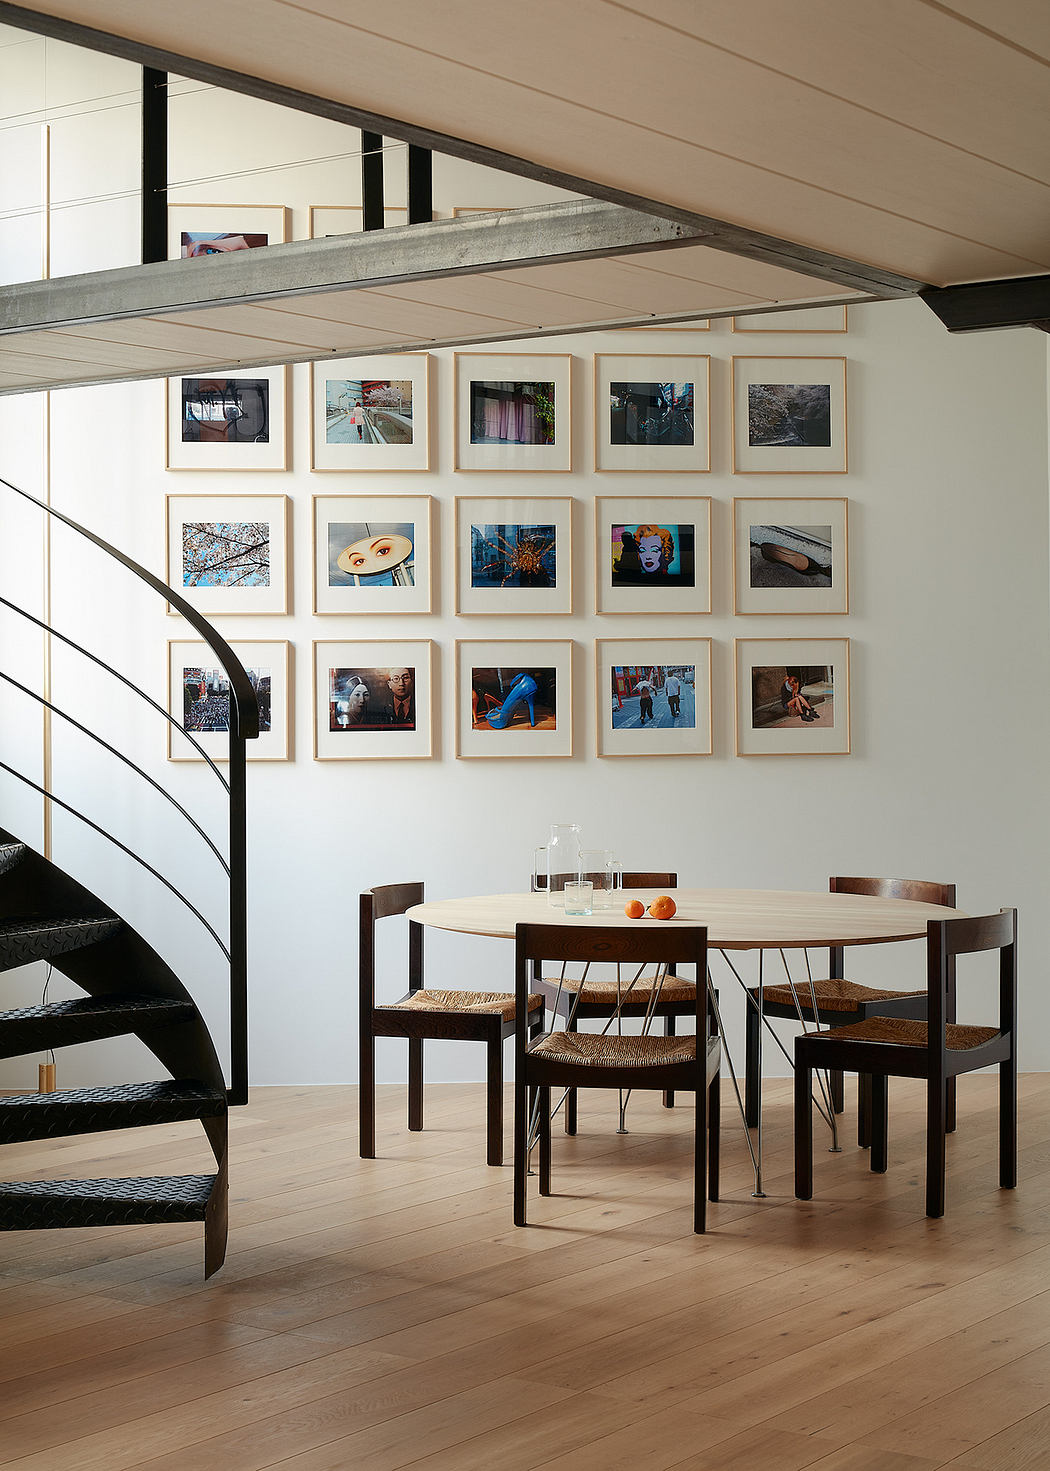 Modern dining room with a wooden table, chairs, gallery wall, and spiral staircase